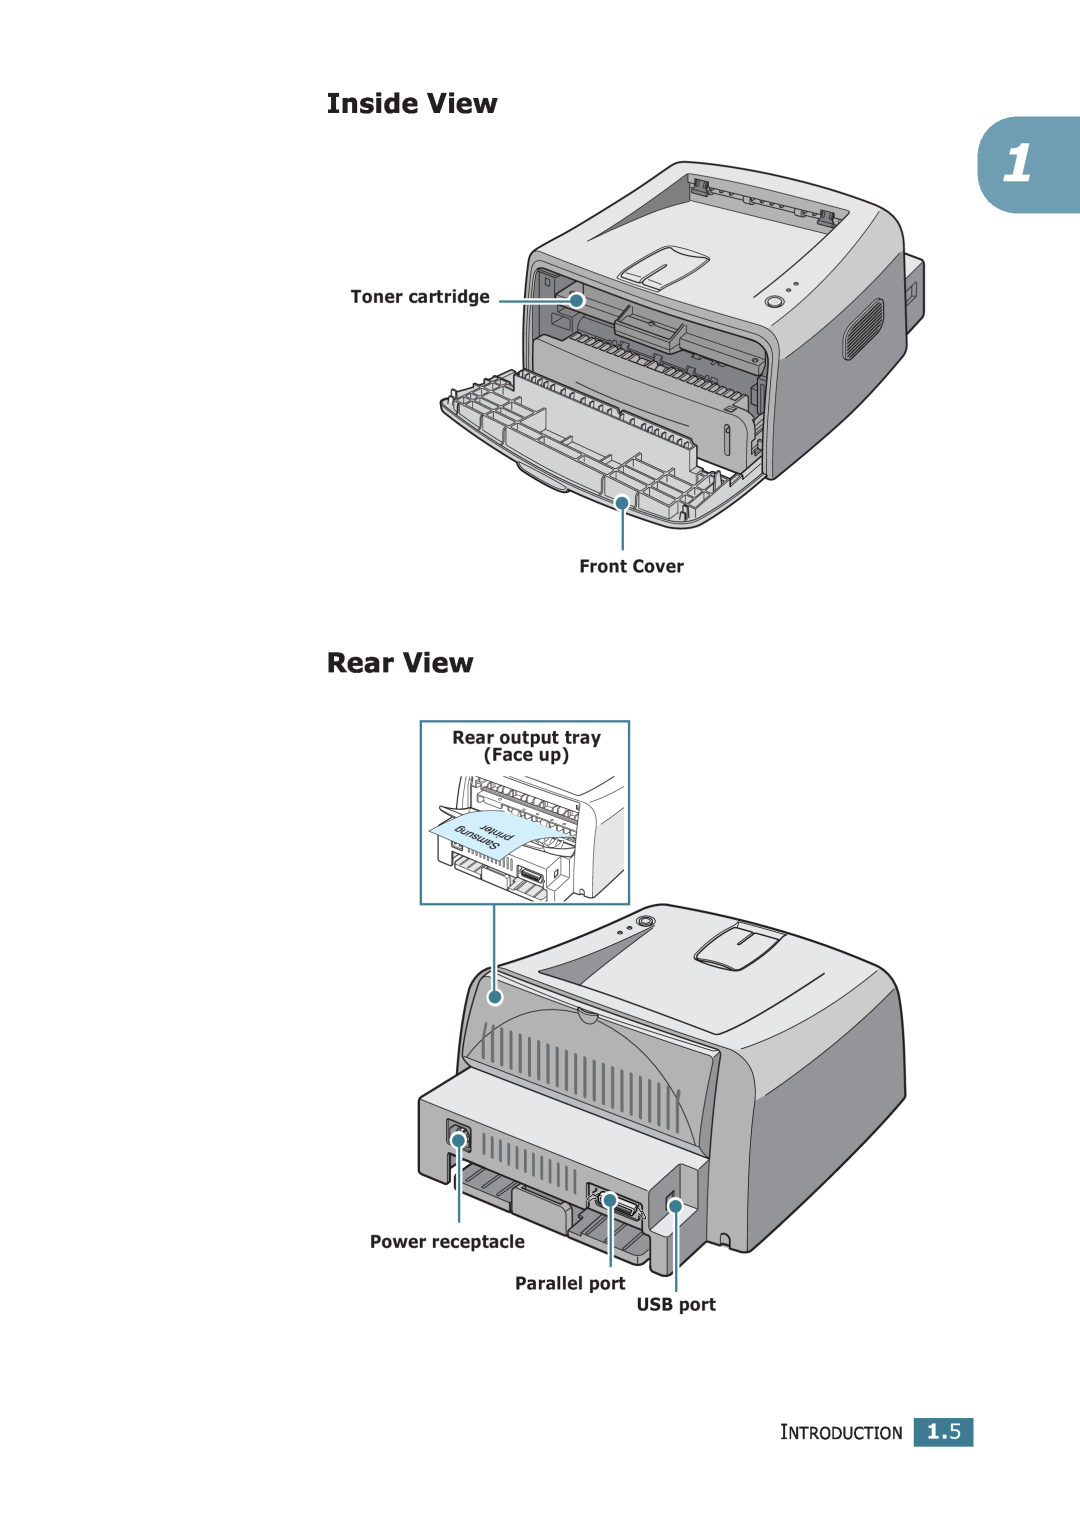 Samsung ML-1710P Inside View, Rear View, Toner cartridge Front Cover, Power receptacle Parallel port USB port, Face up 